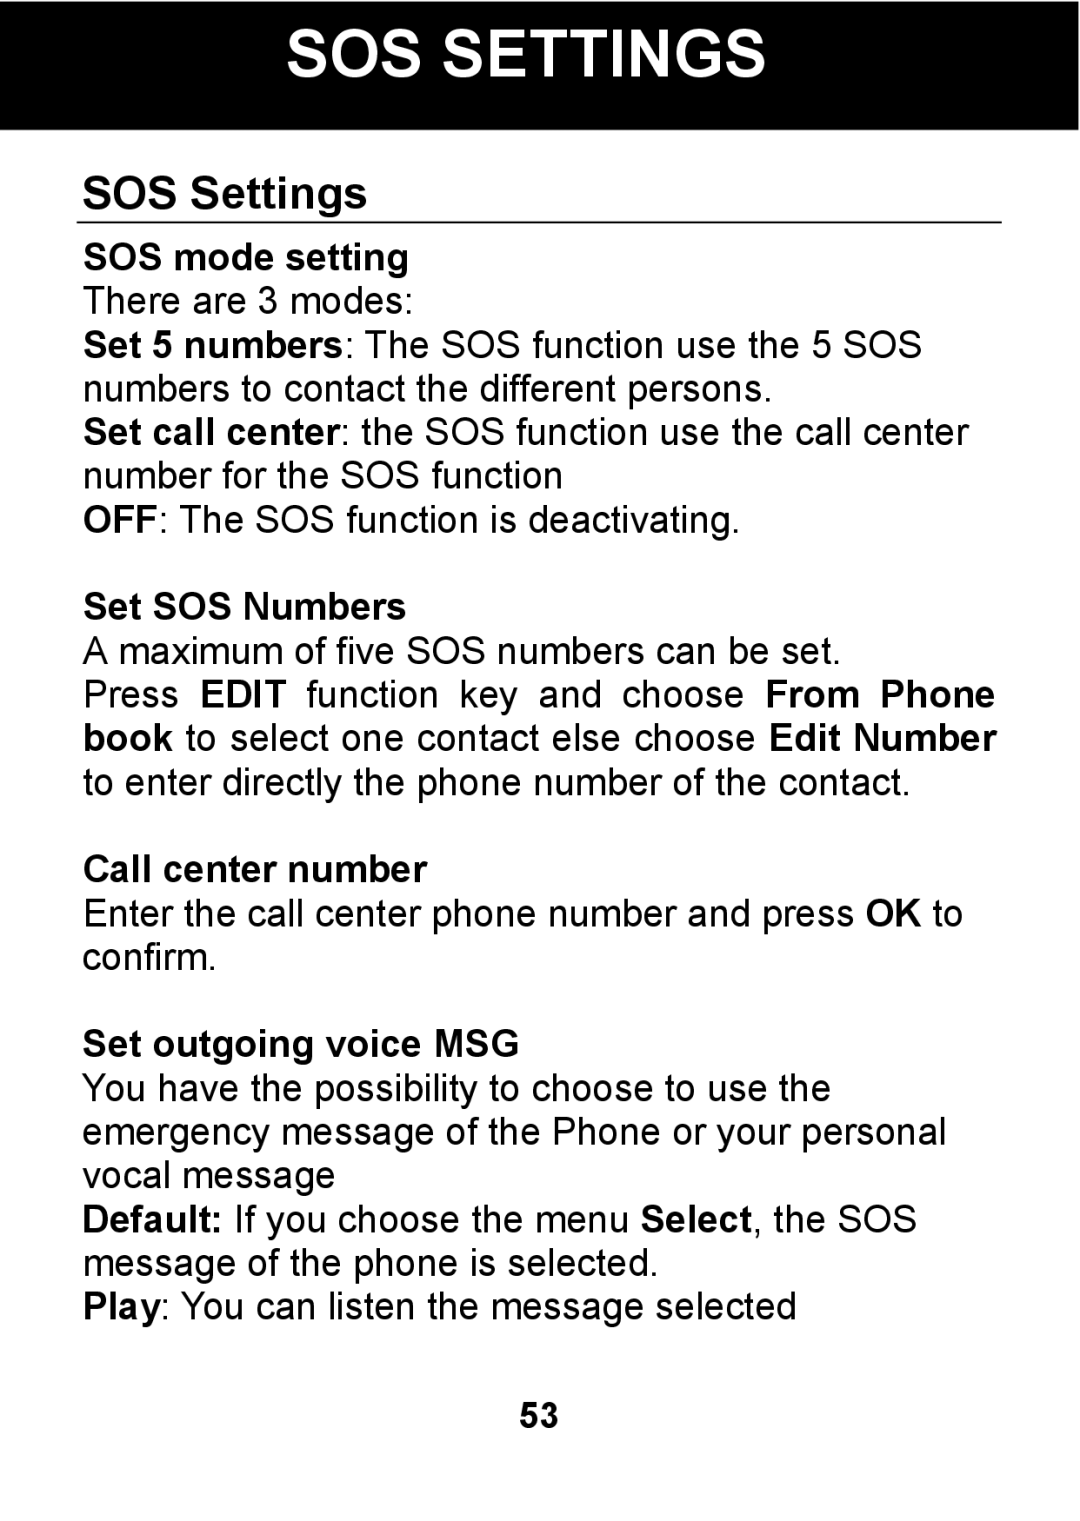 Pal/Pax PAL101 manual SOS Settings, SOS mode setting There are 3 modes, Set SOS Numbers, Call center number 